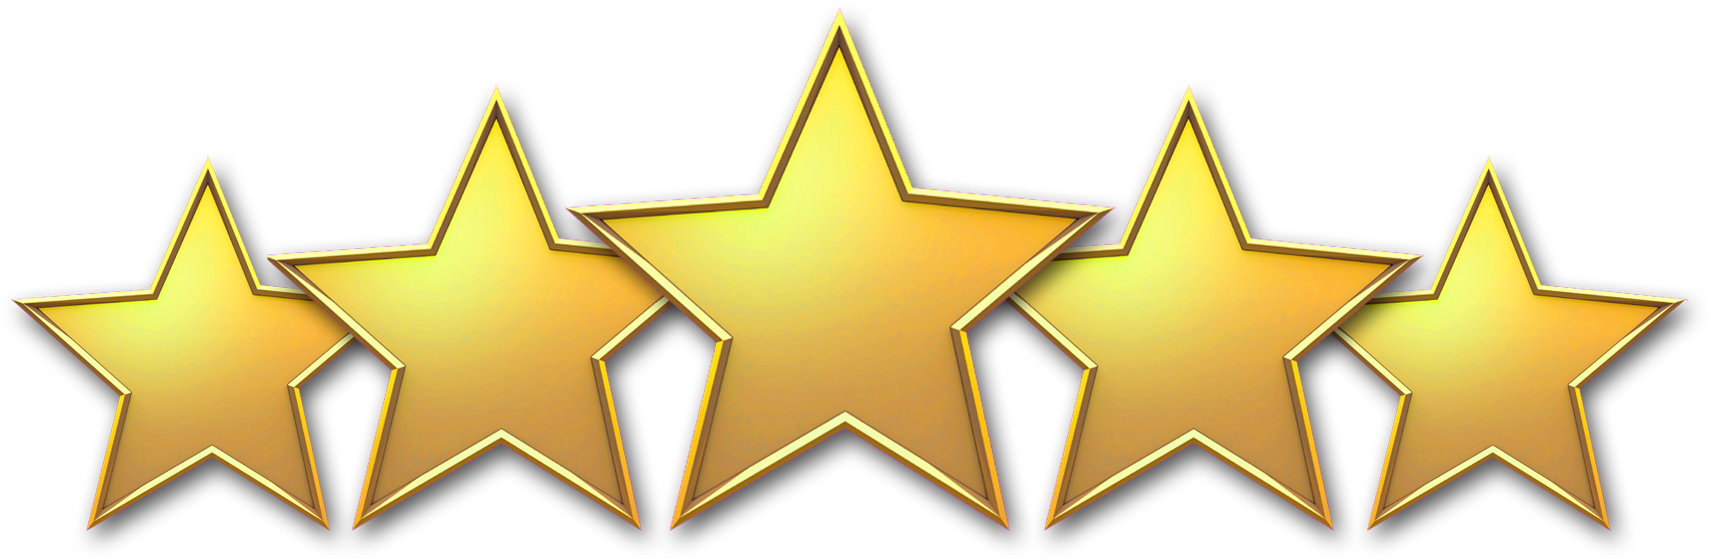 Five Star Rating Golden Graphic